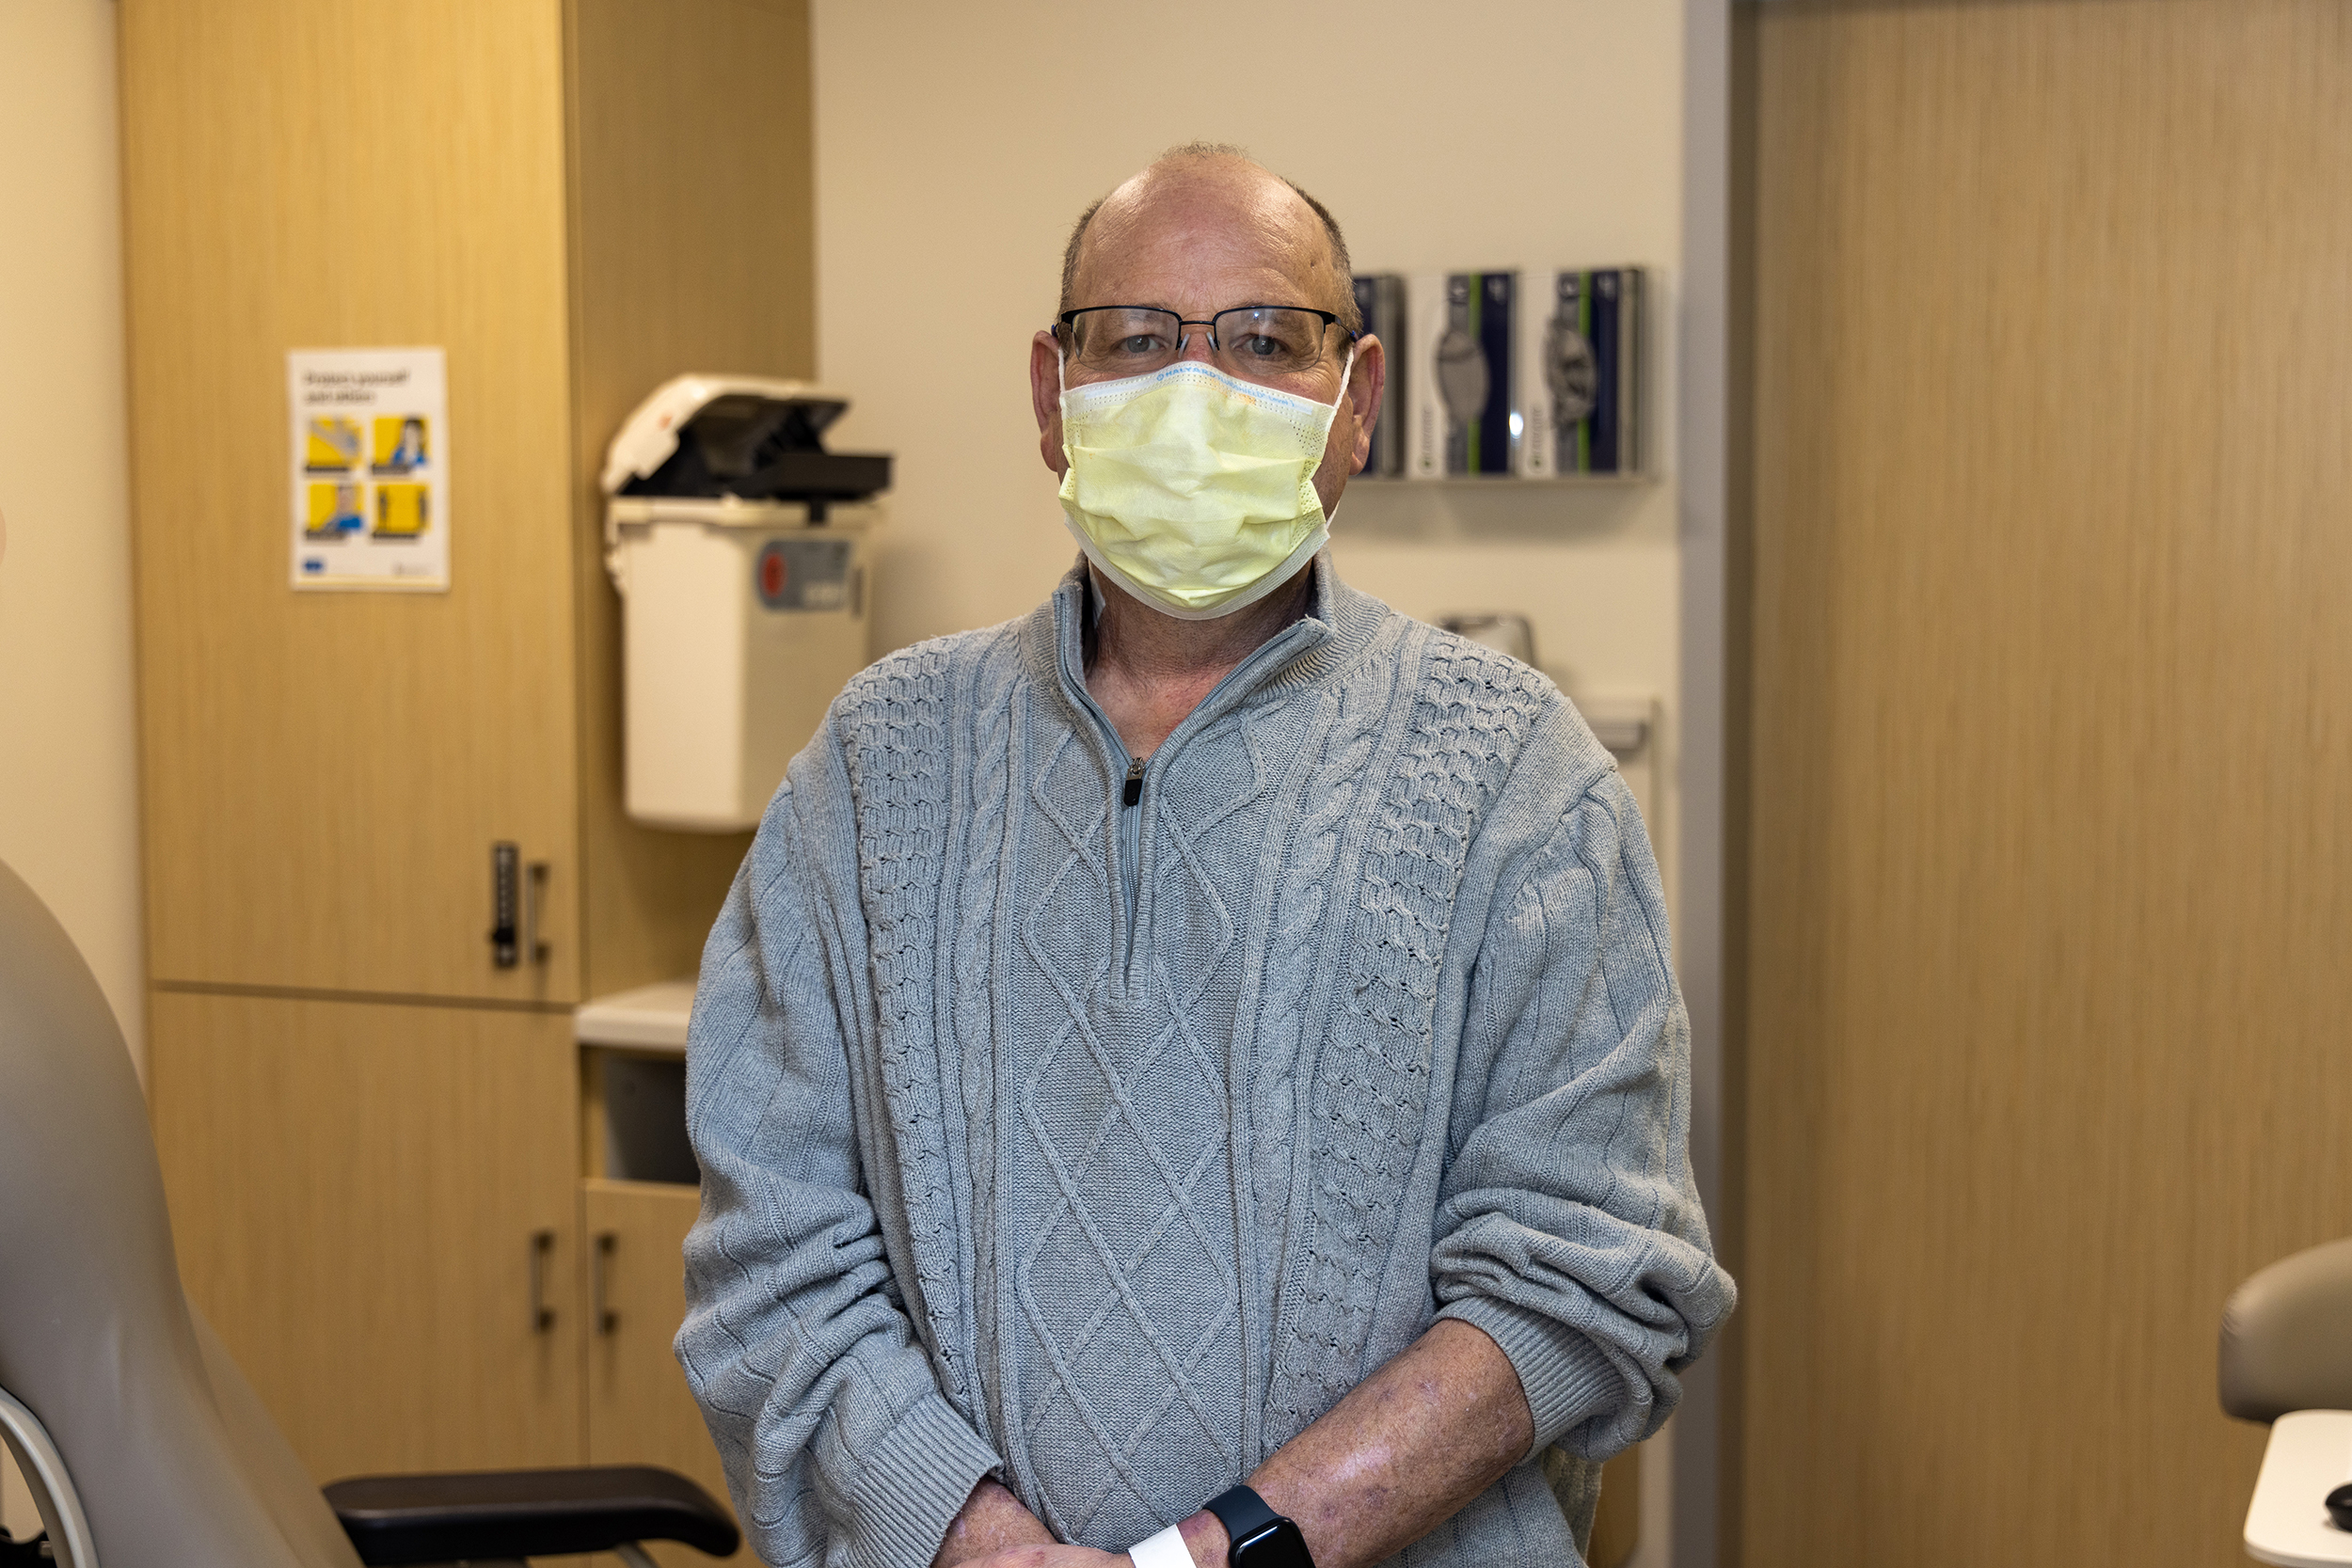 Thad Crane smiling behind mask during a follow up visit